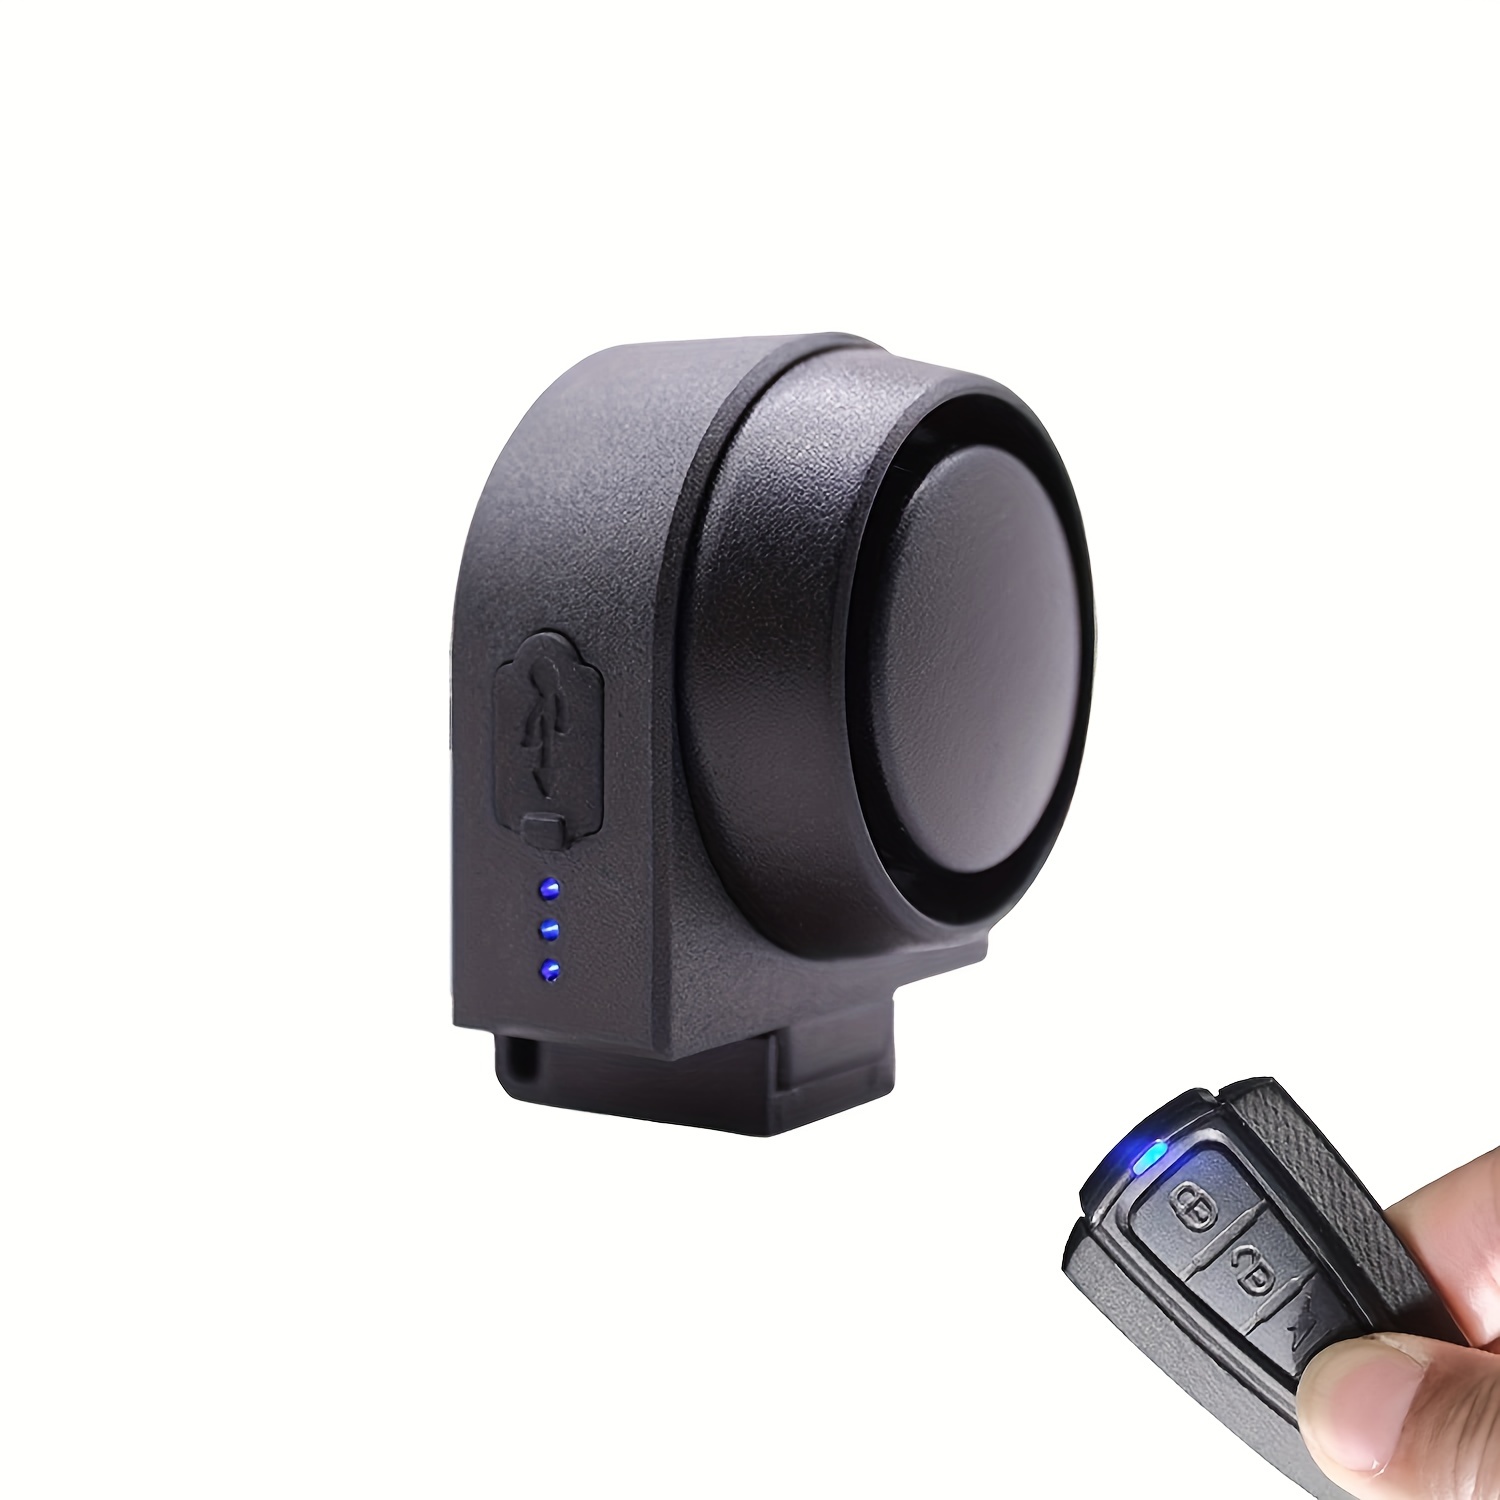 

Secure Your Bicycle With This Smart, Waterproof Anti-theft Alarm With Wireless Remote Control!